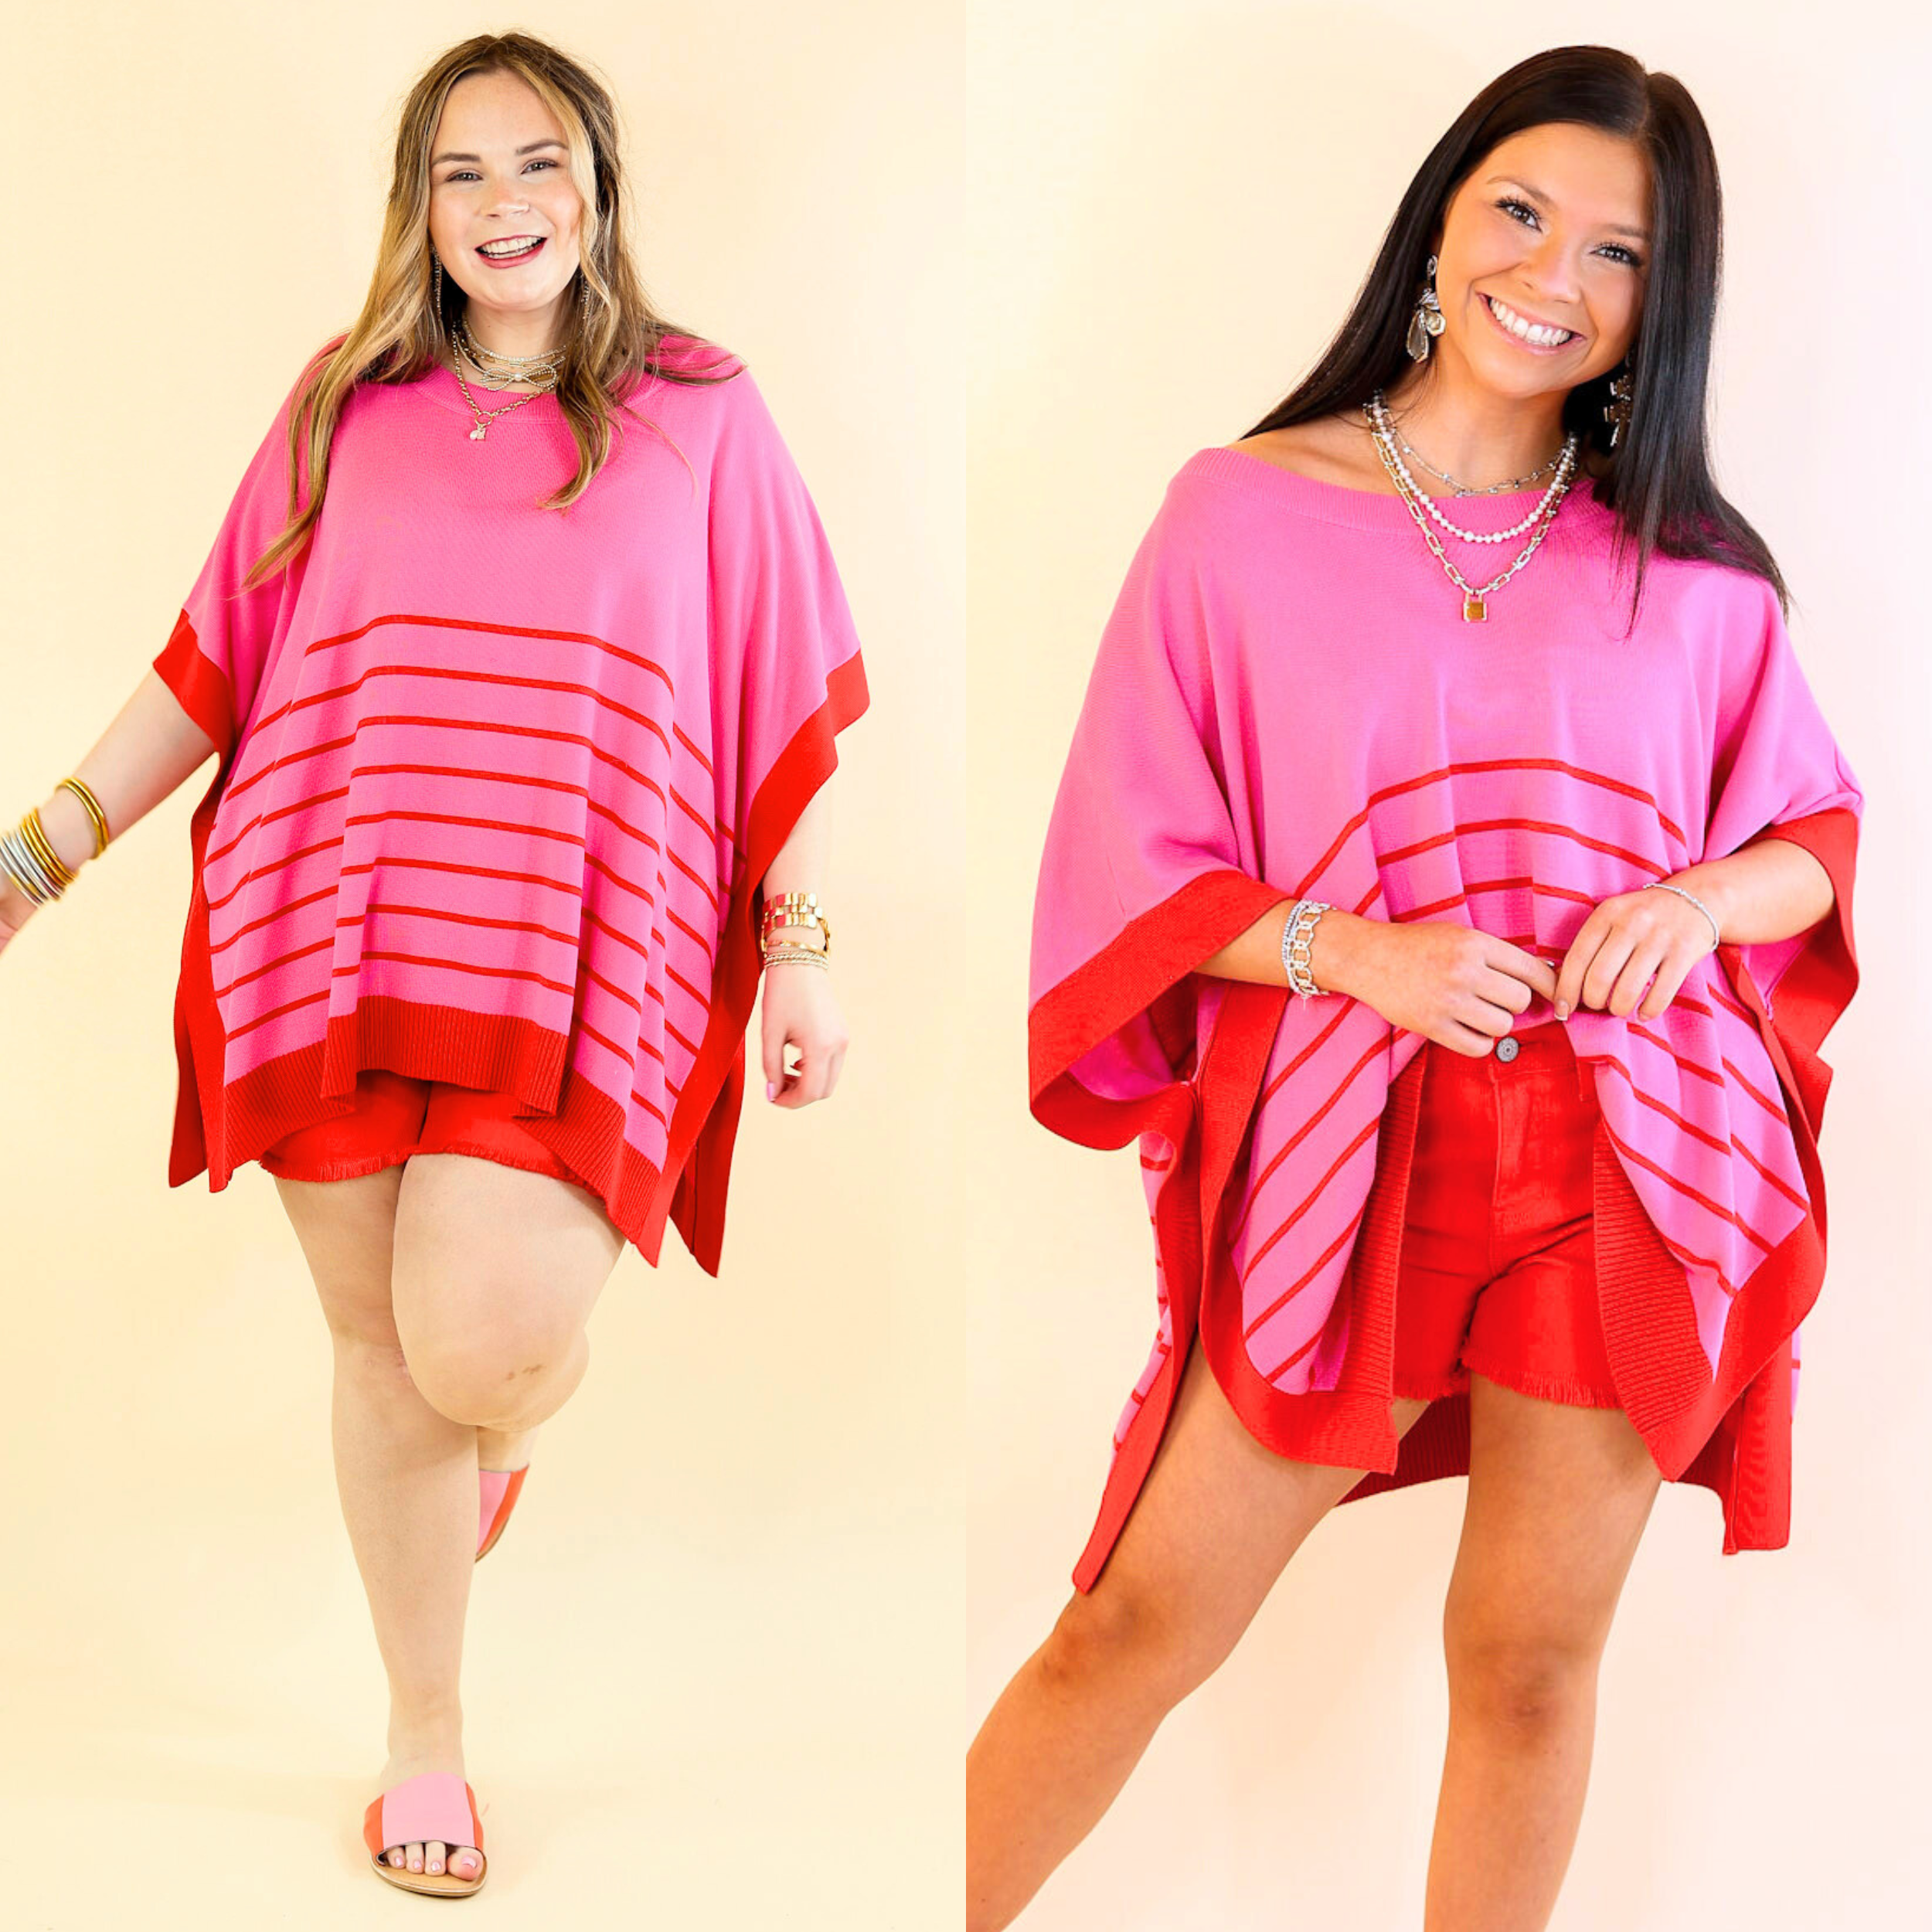 Casual to Chic Short Sleeve Striped Poncho Top in Pink and Red - Giddy Up Glamour Boutique